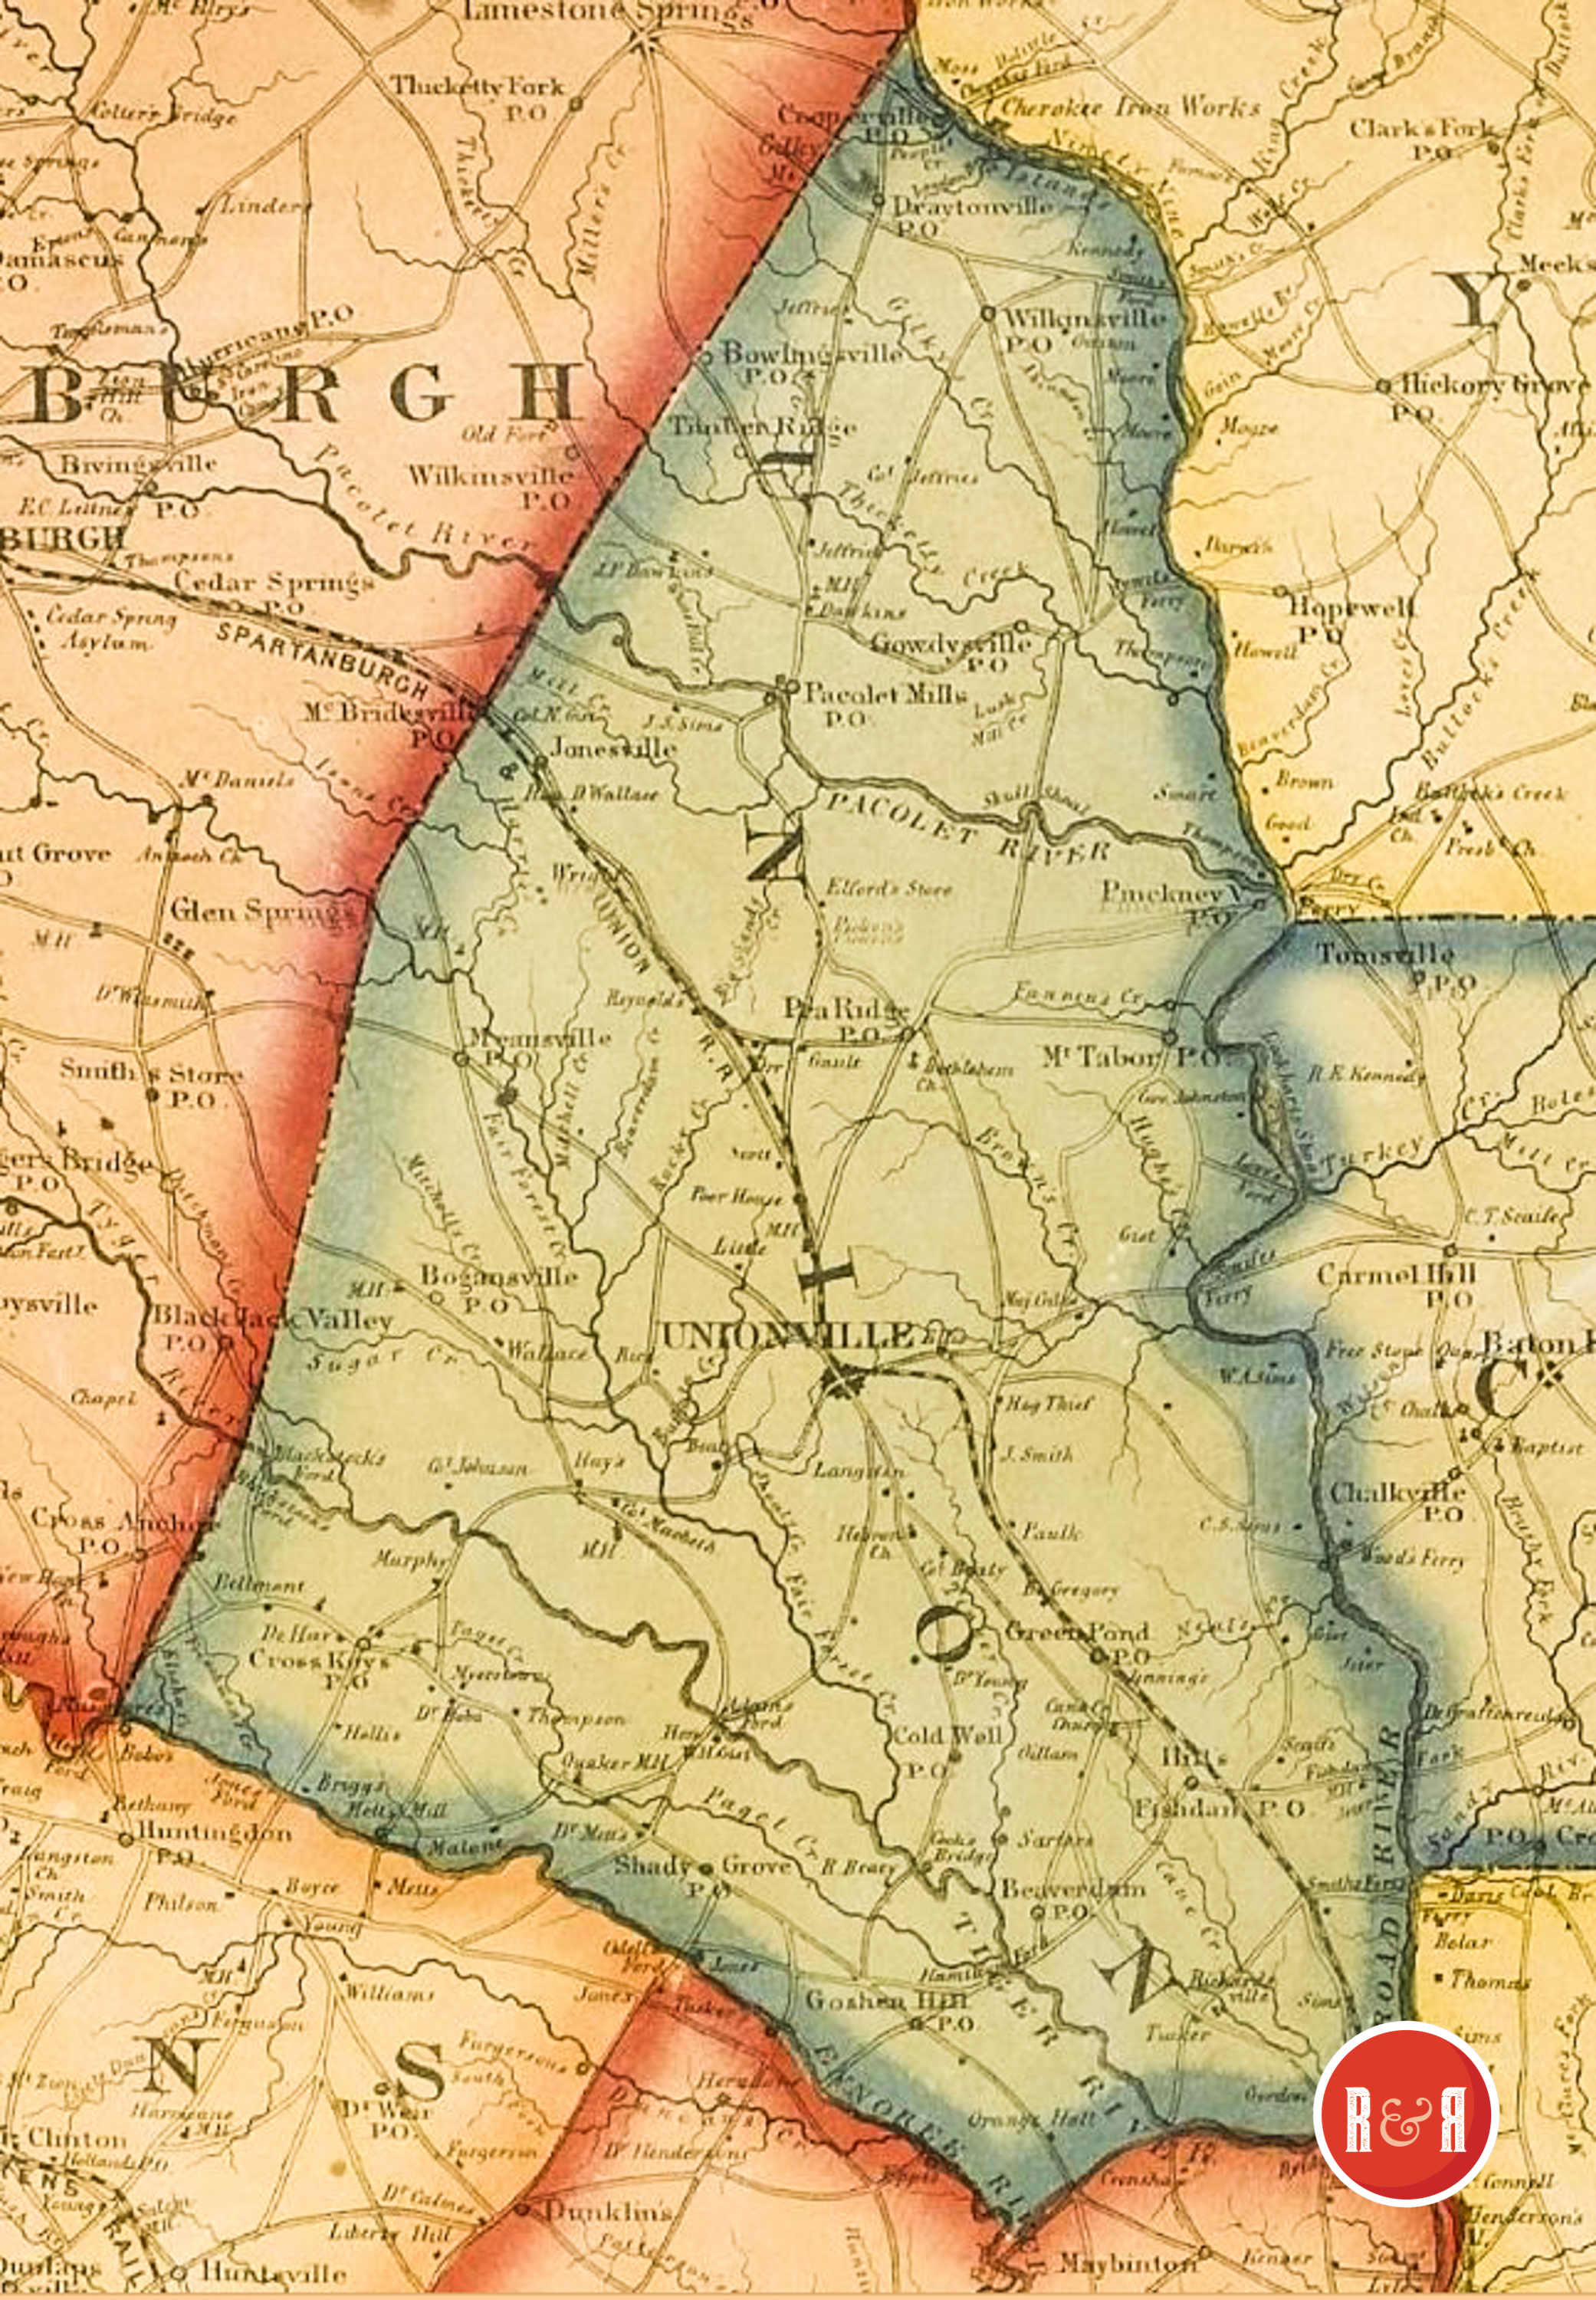 COLTON'S 1854 MAP OF UNION COUNTY